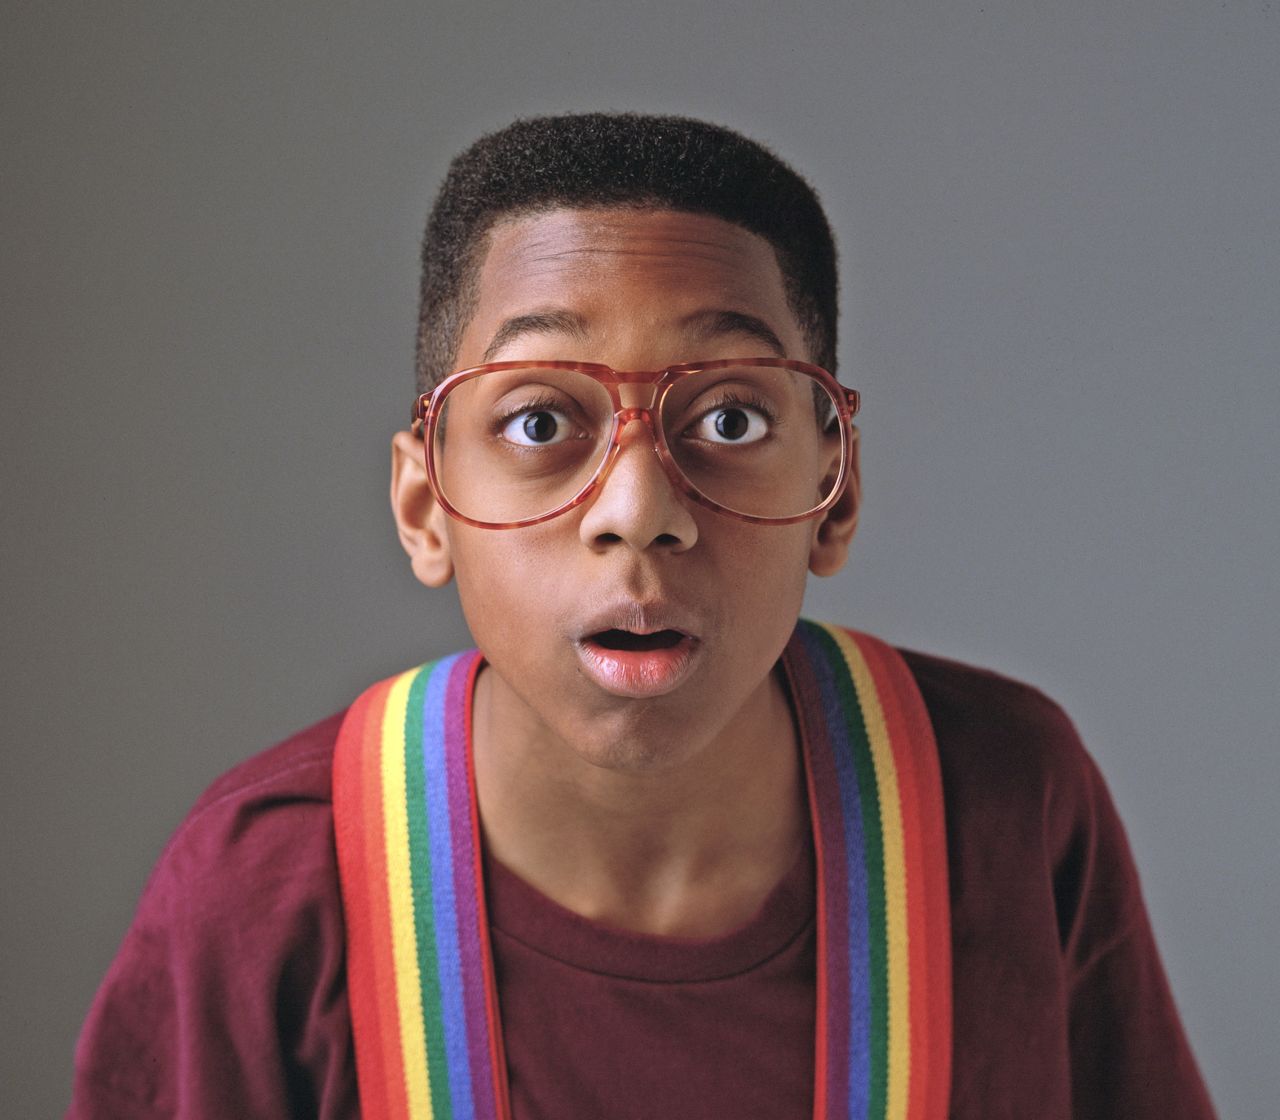 Jaleel White has worked very hard to leave Steve Urkel in the '90s, but a character that great just can't die. Although "Family Matters," too, actually started in 1989, White's masterful portrayal is easily one of the most memorable roles of the decade that followed.